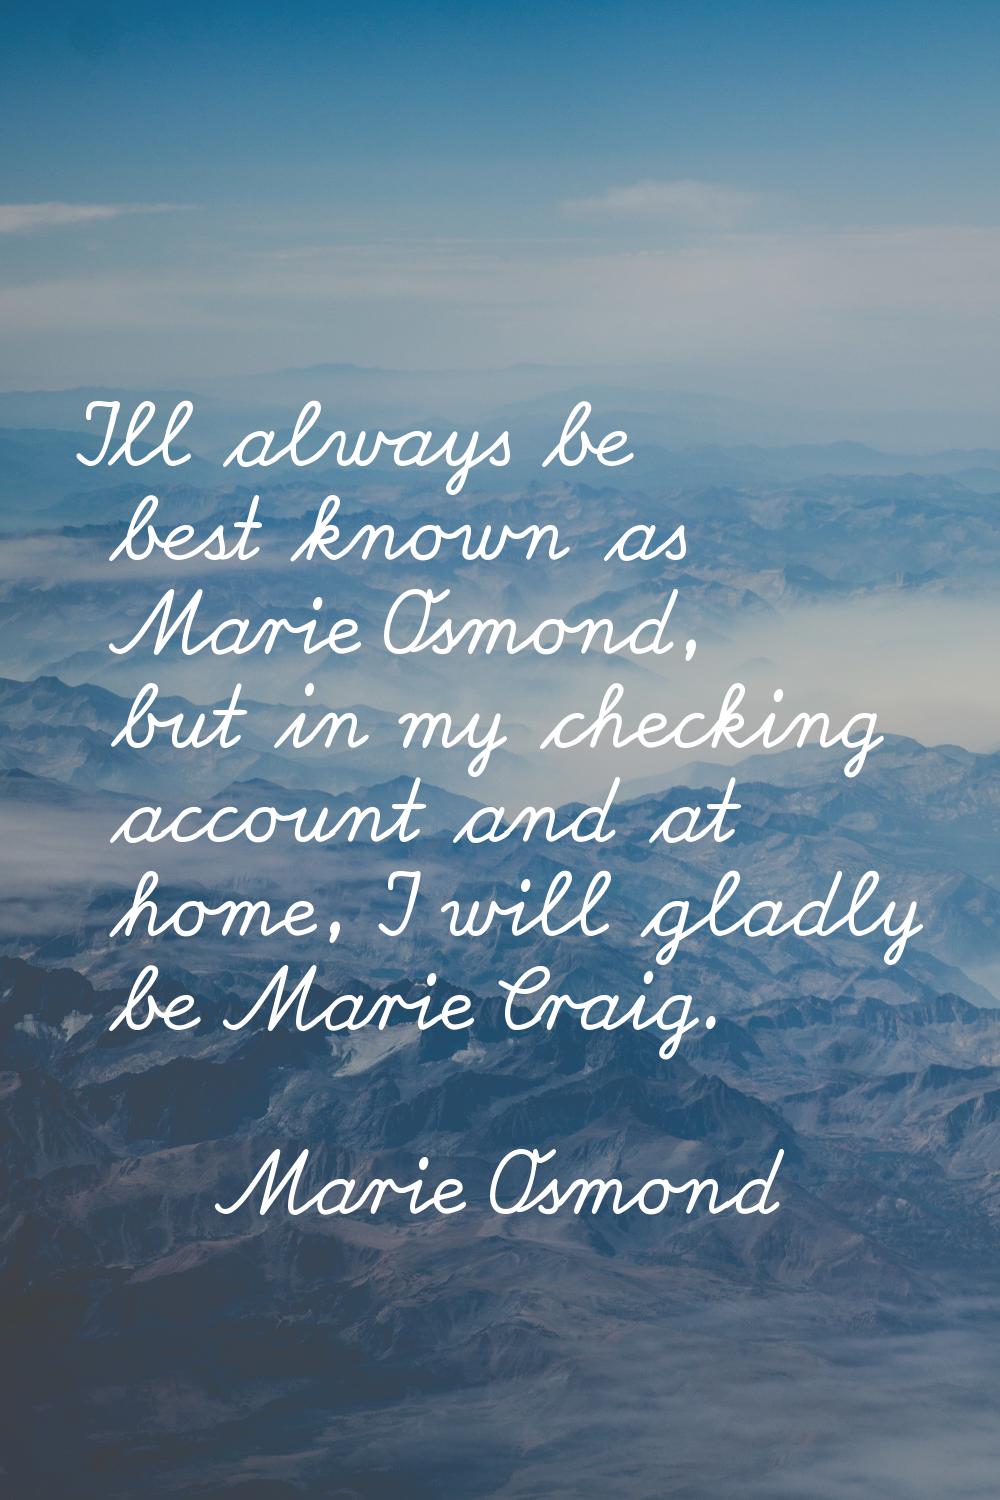 I'll always be best known as Marie Osmond, but in my checking account and at home, I will gladly be